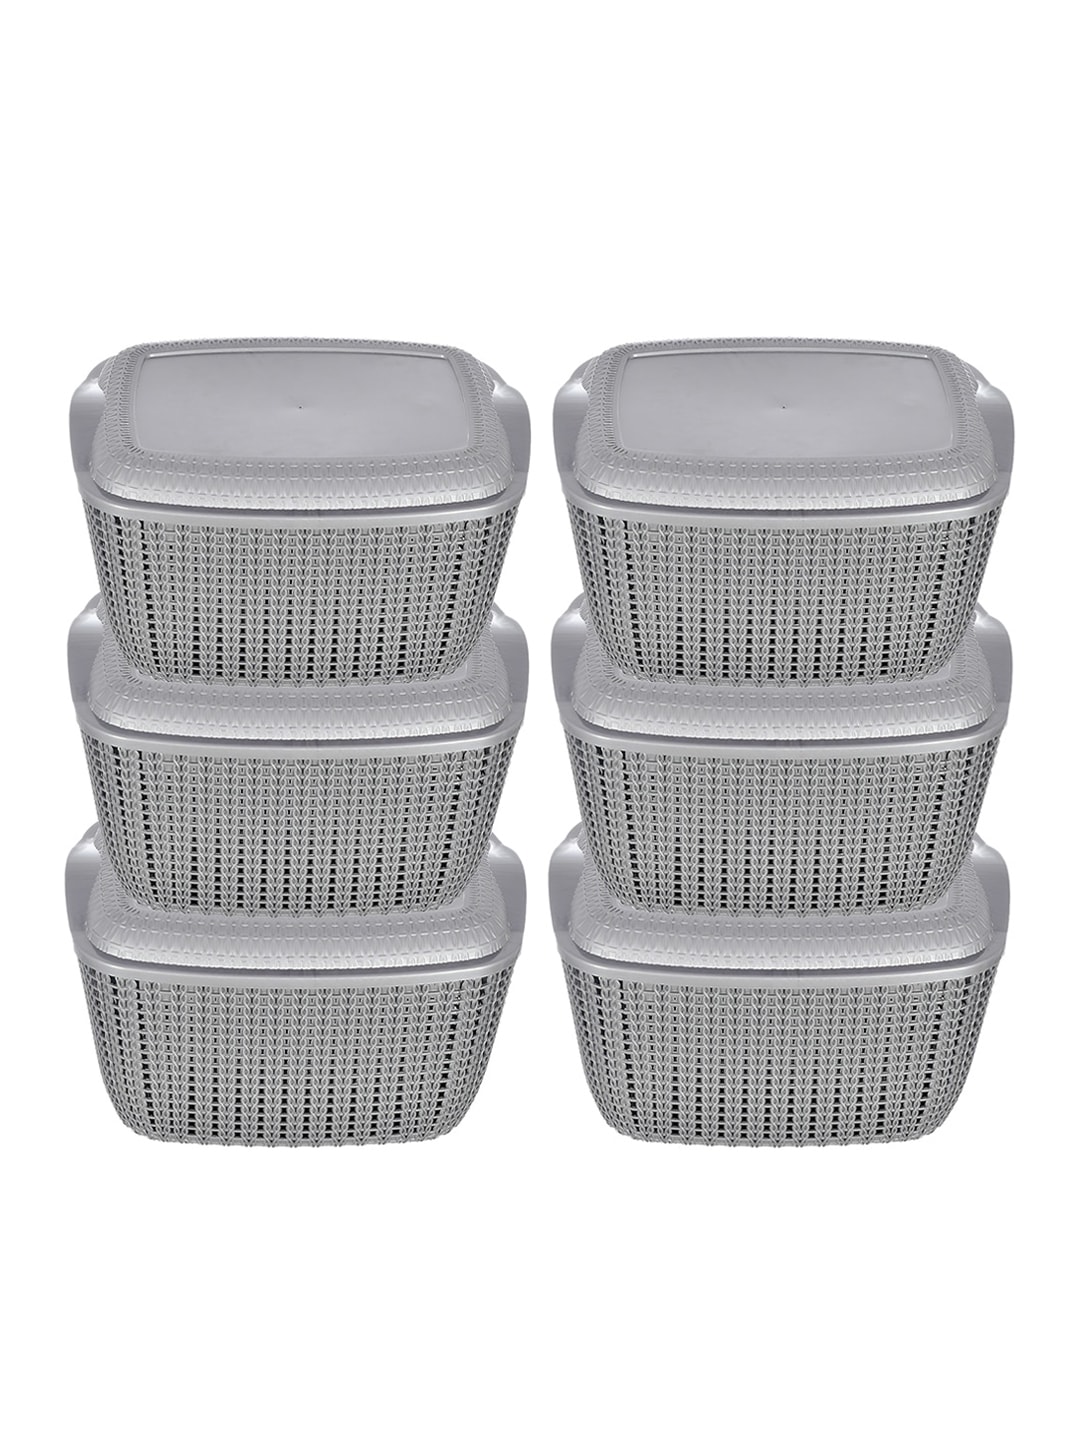 Kuber Industries Set of 6 Grey Small Plastic Basket With Lids Price in India